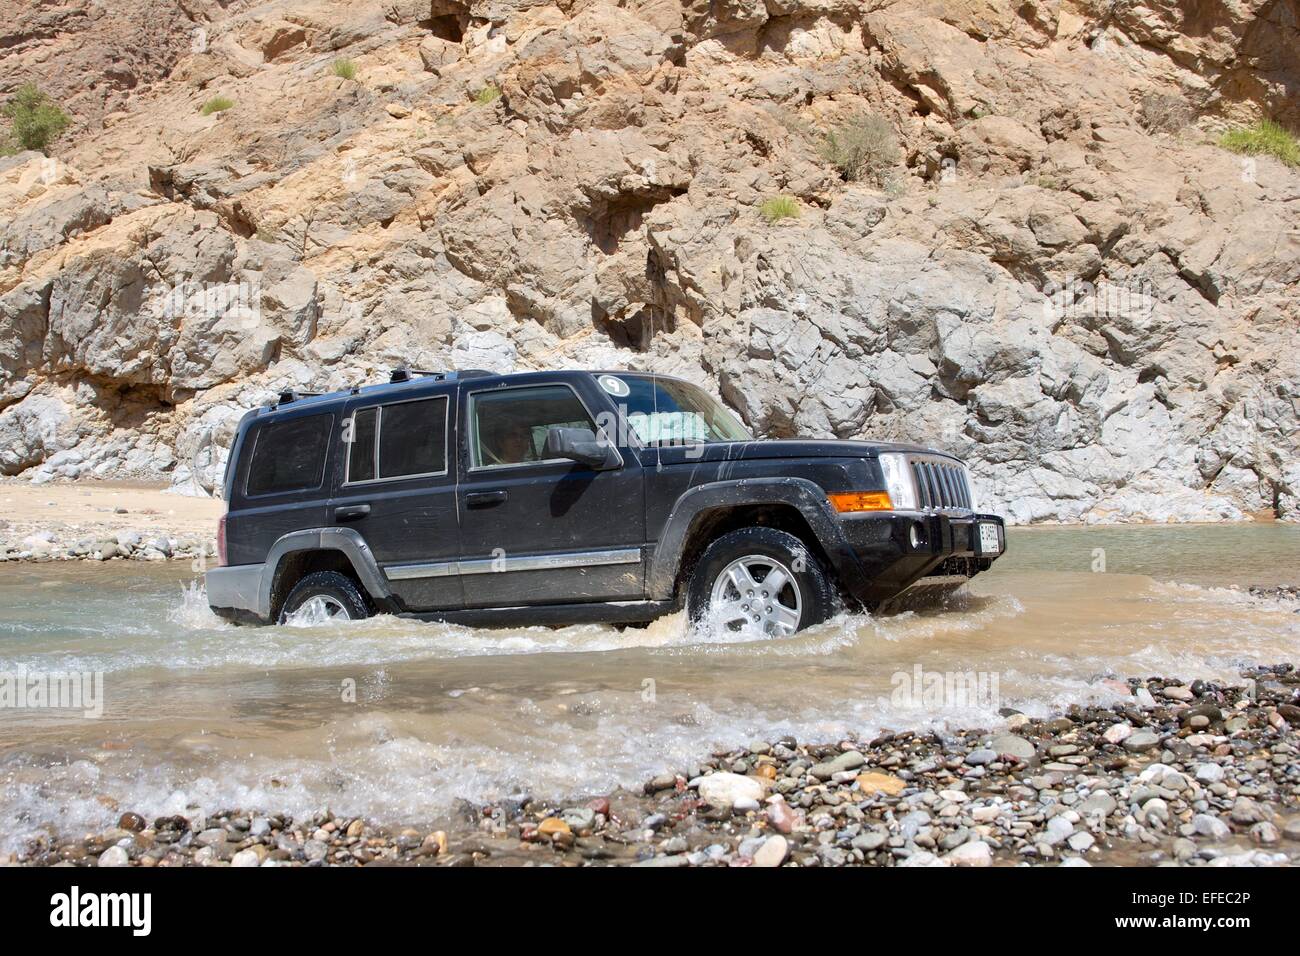 A Jeep Commander 4x4 vehicle negotiates a river in the desert interior of the Sultanate of Oman. Stock Photo